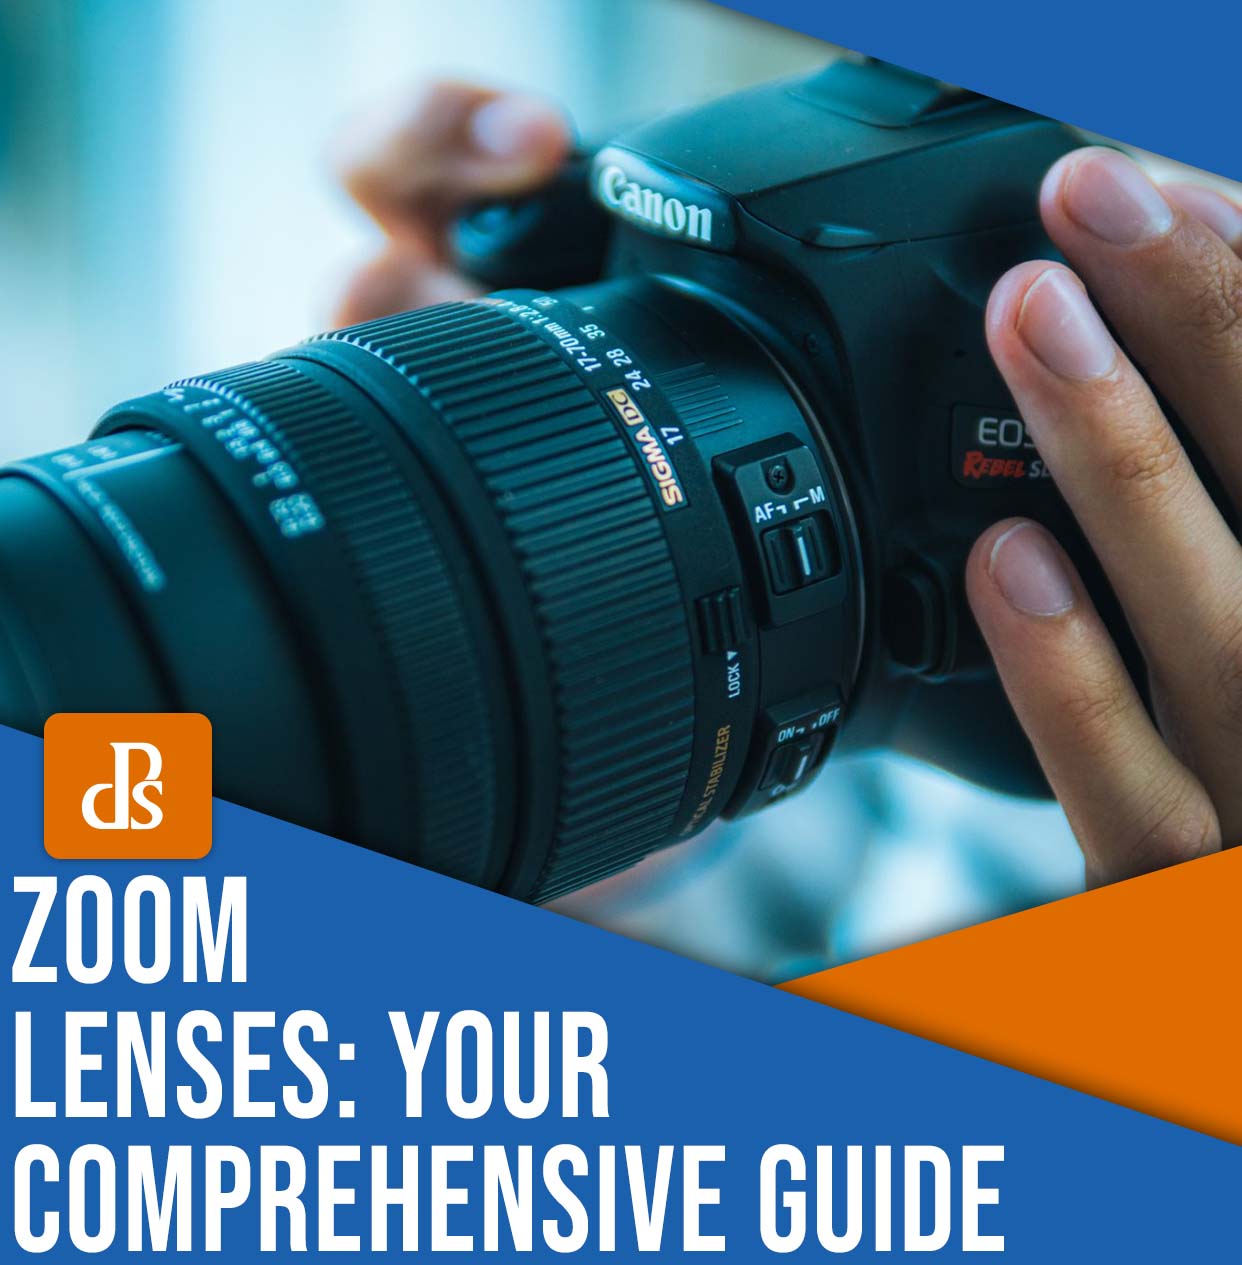 Zoom lenses: Your Comprehensive Guide